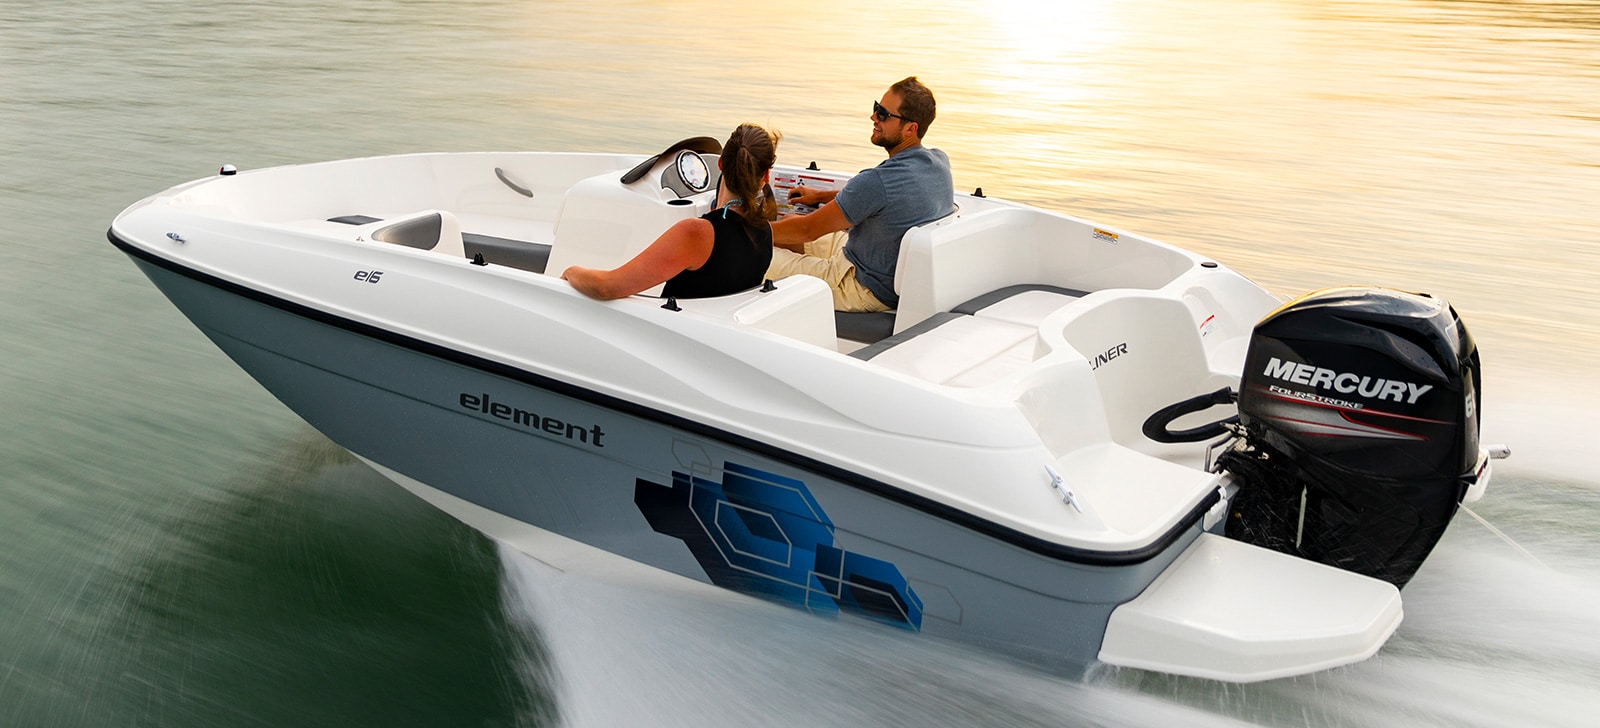 Best Boats Under $20,000, Small Family Boats